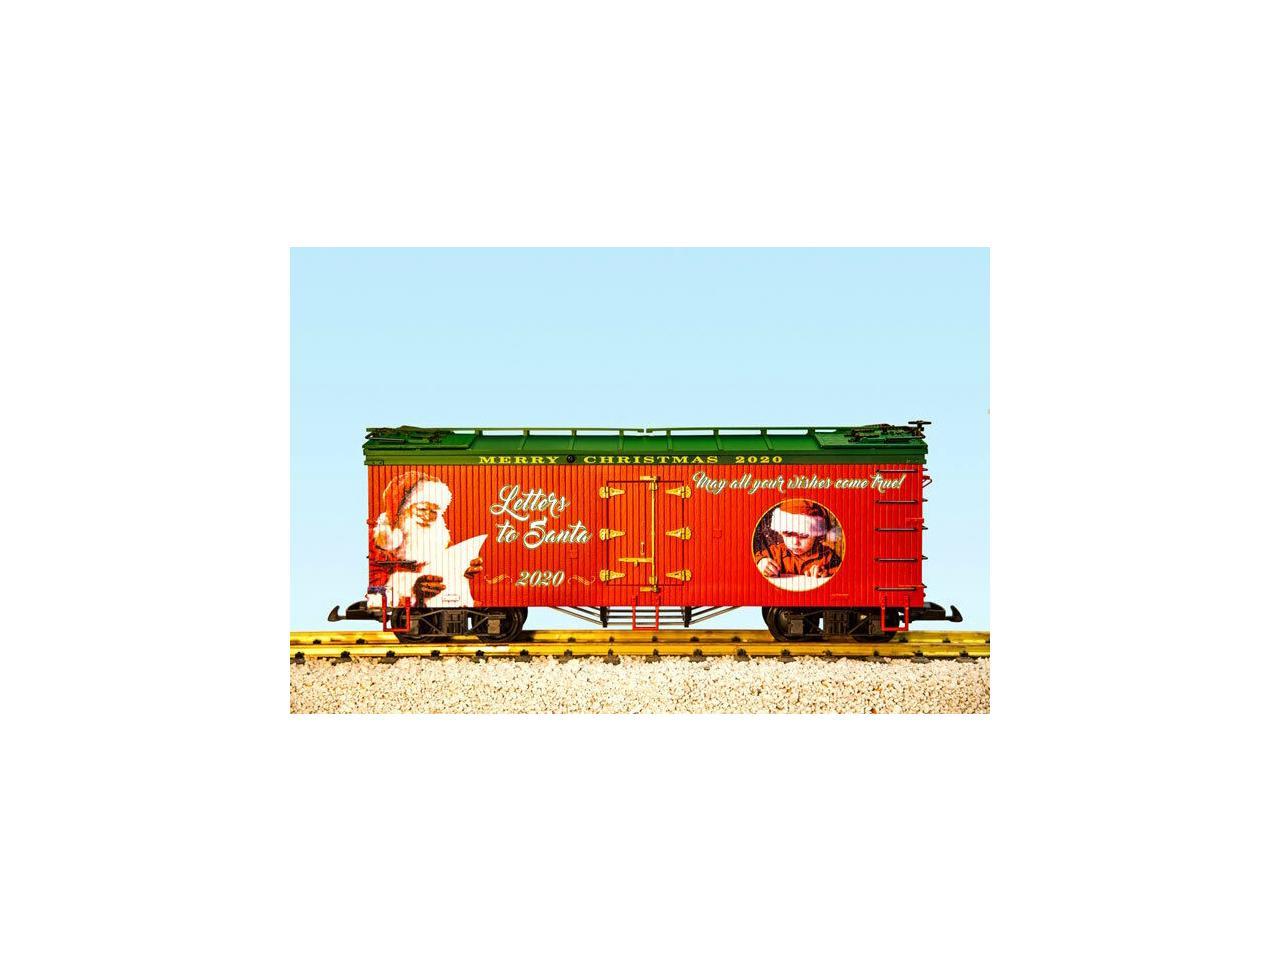 JUST RELEASED NEW 2019 USA Trains R13037 CHRISTMAS 2019 LIMITED RUN REEFER 